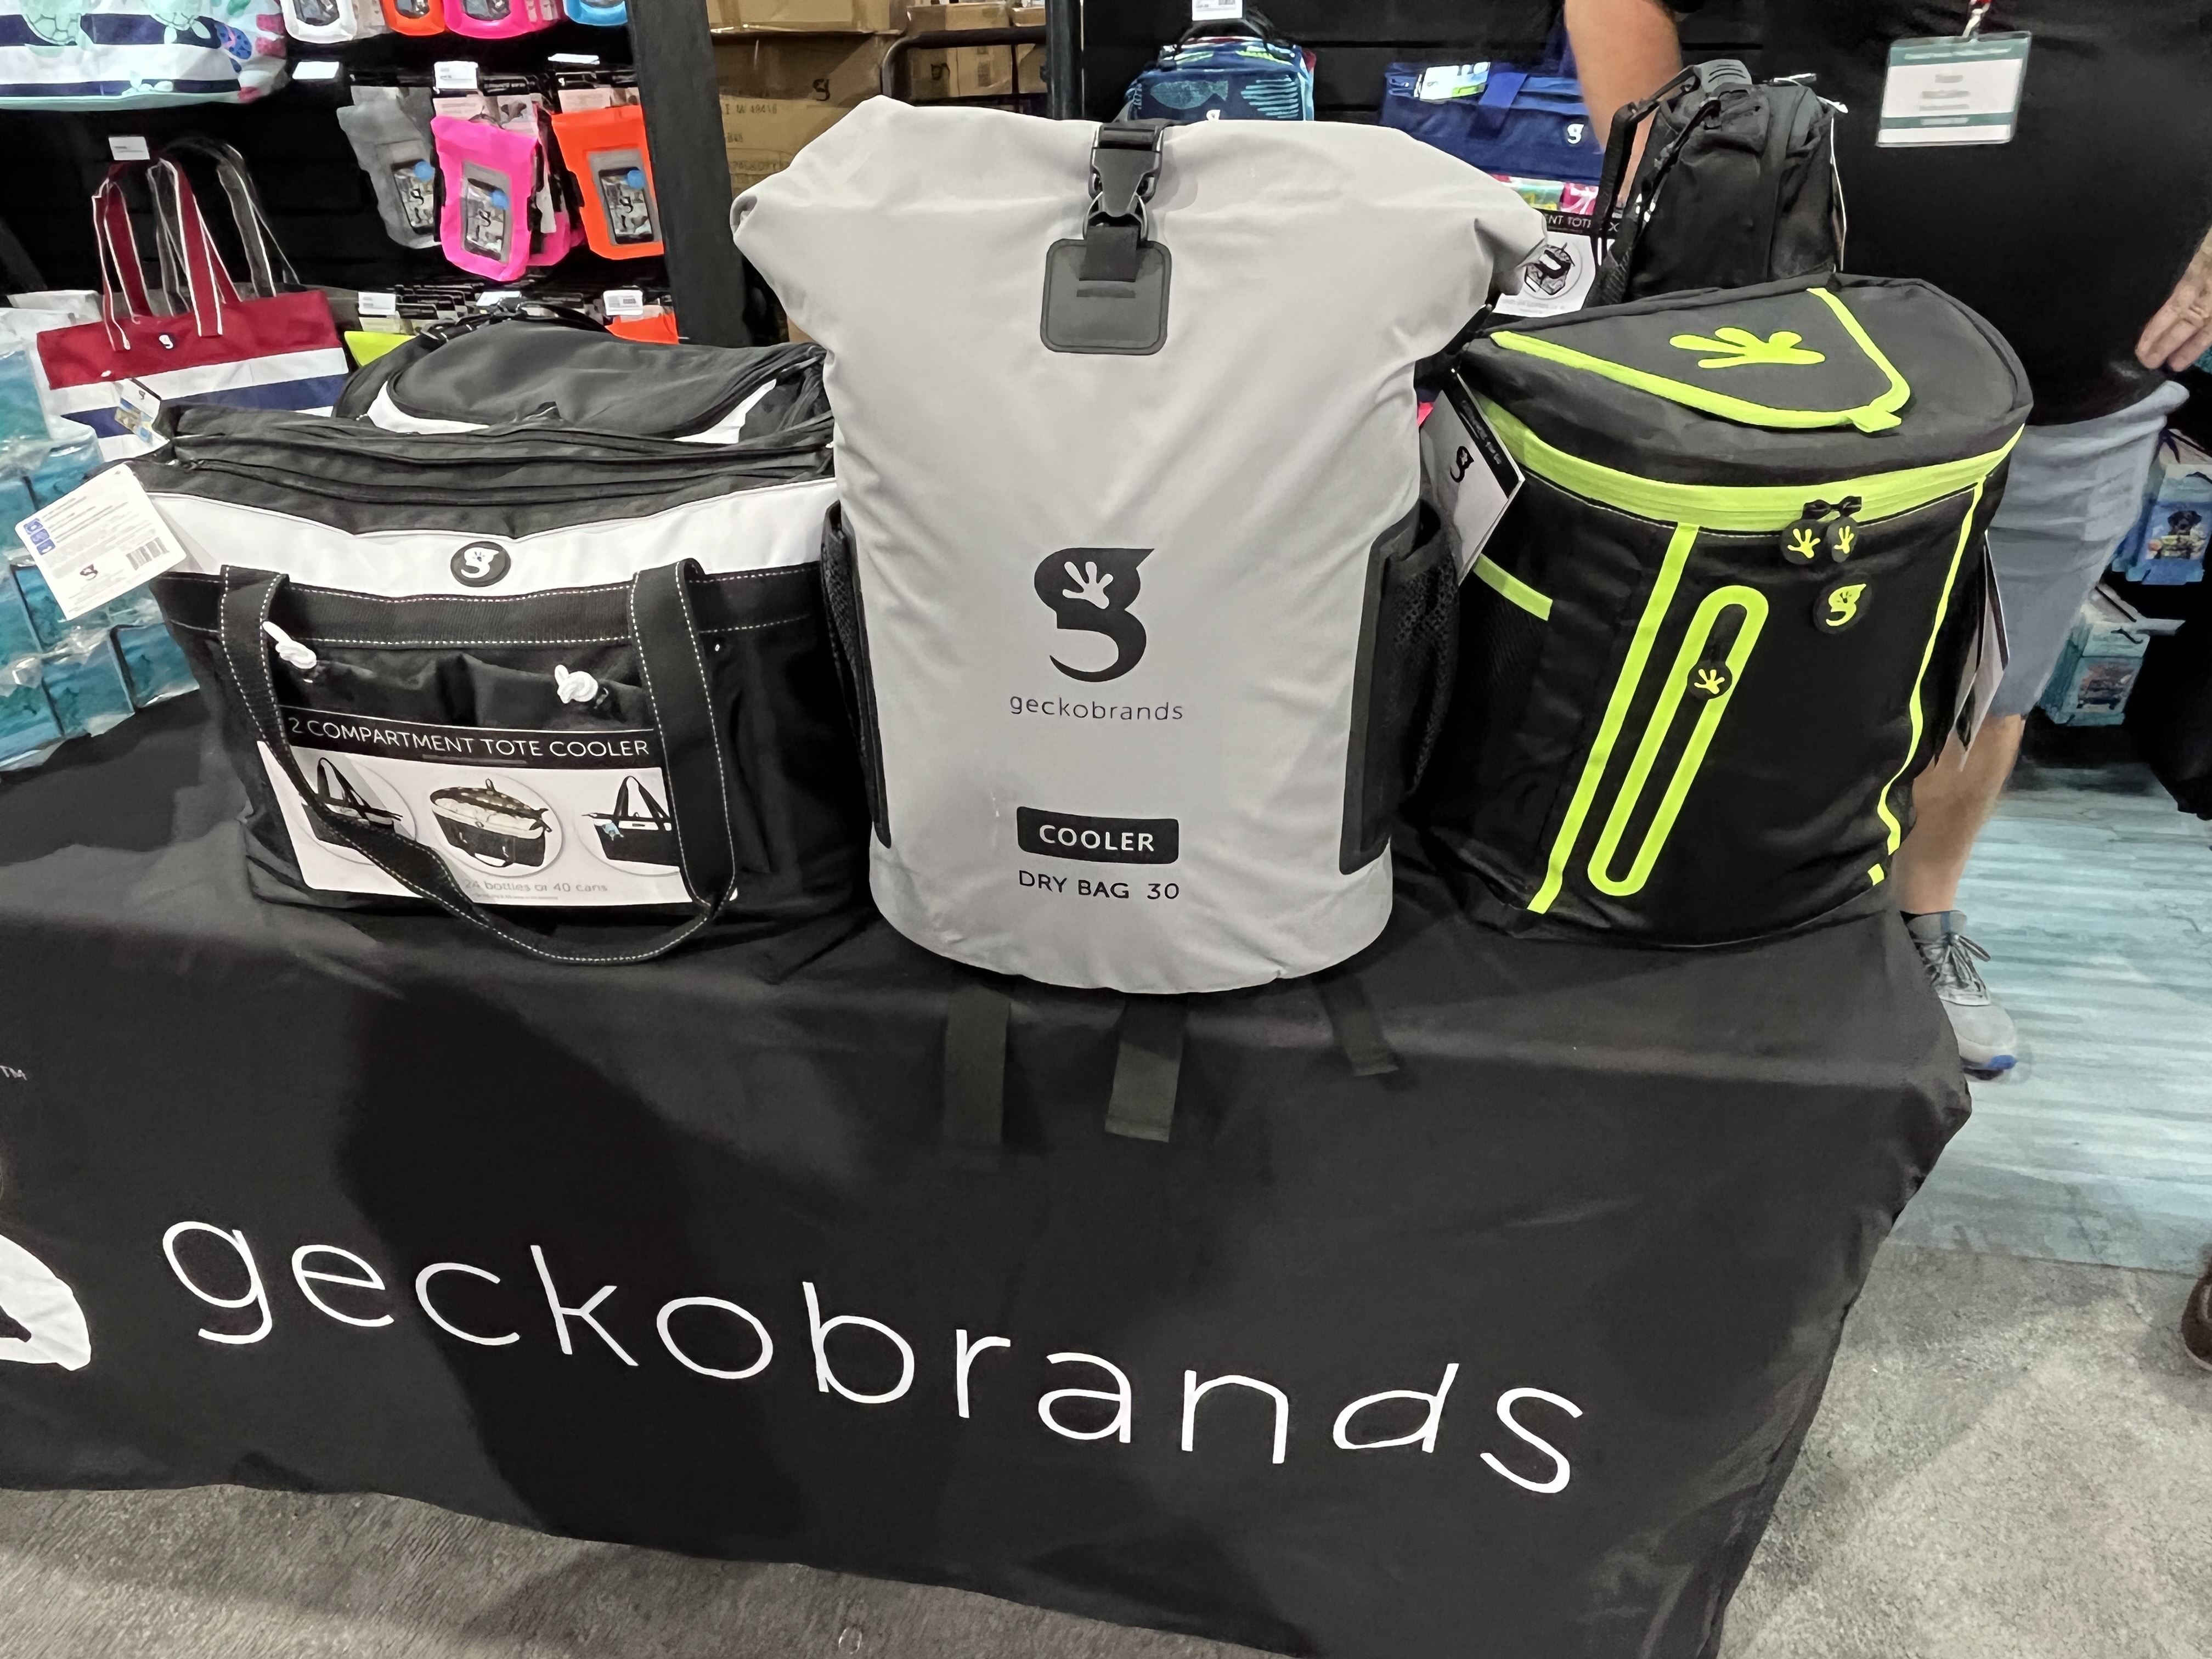 Gift guide for boaters: GeckoBrands Coolers & Dry Bags